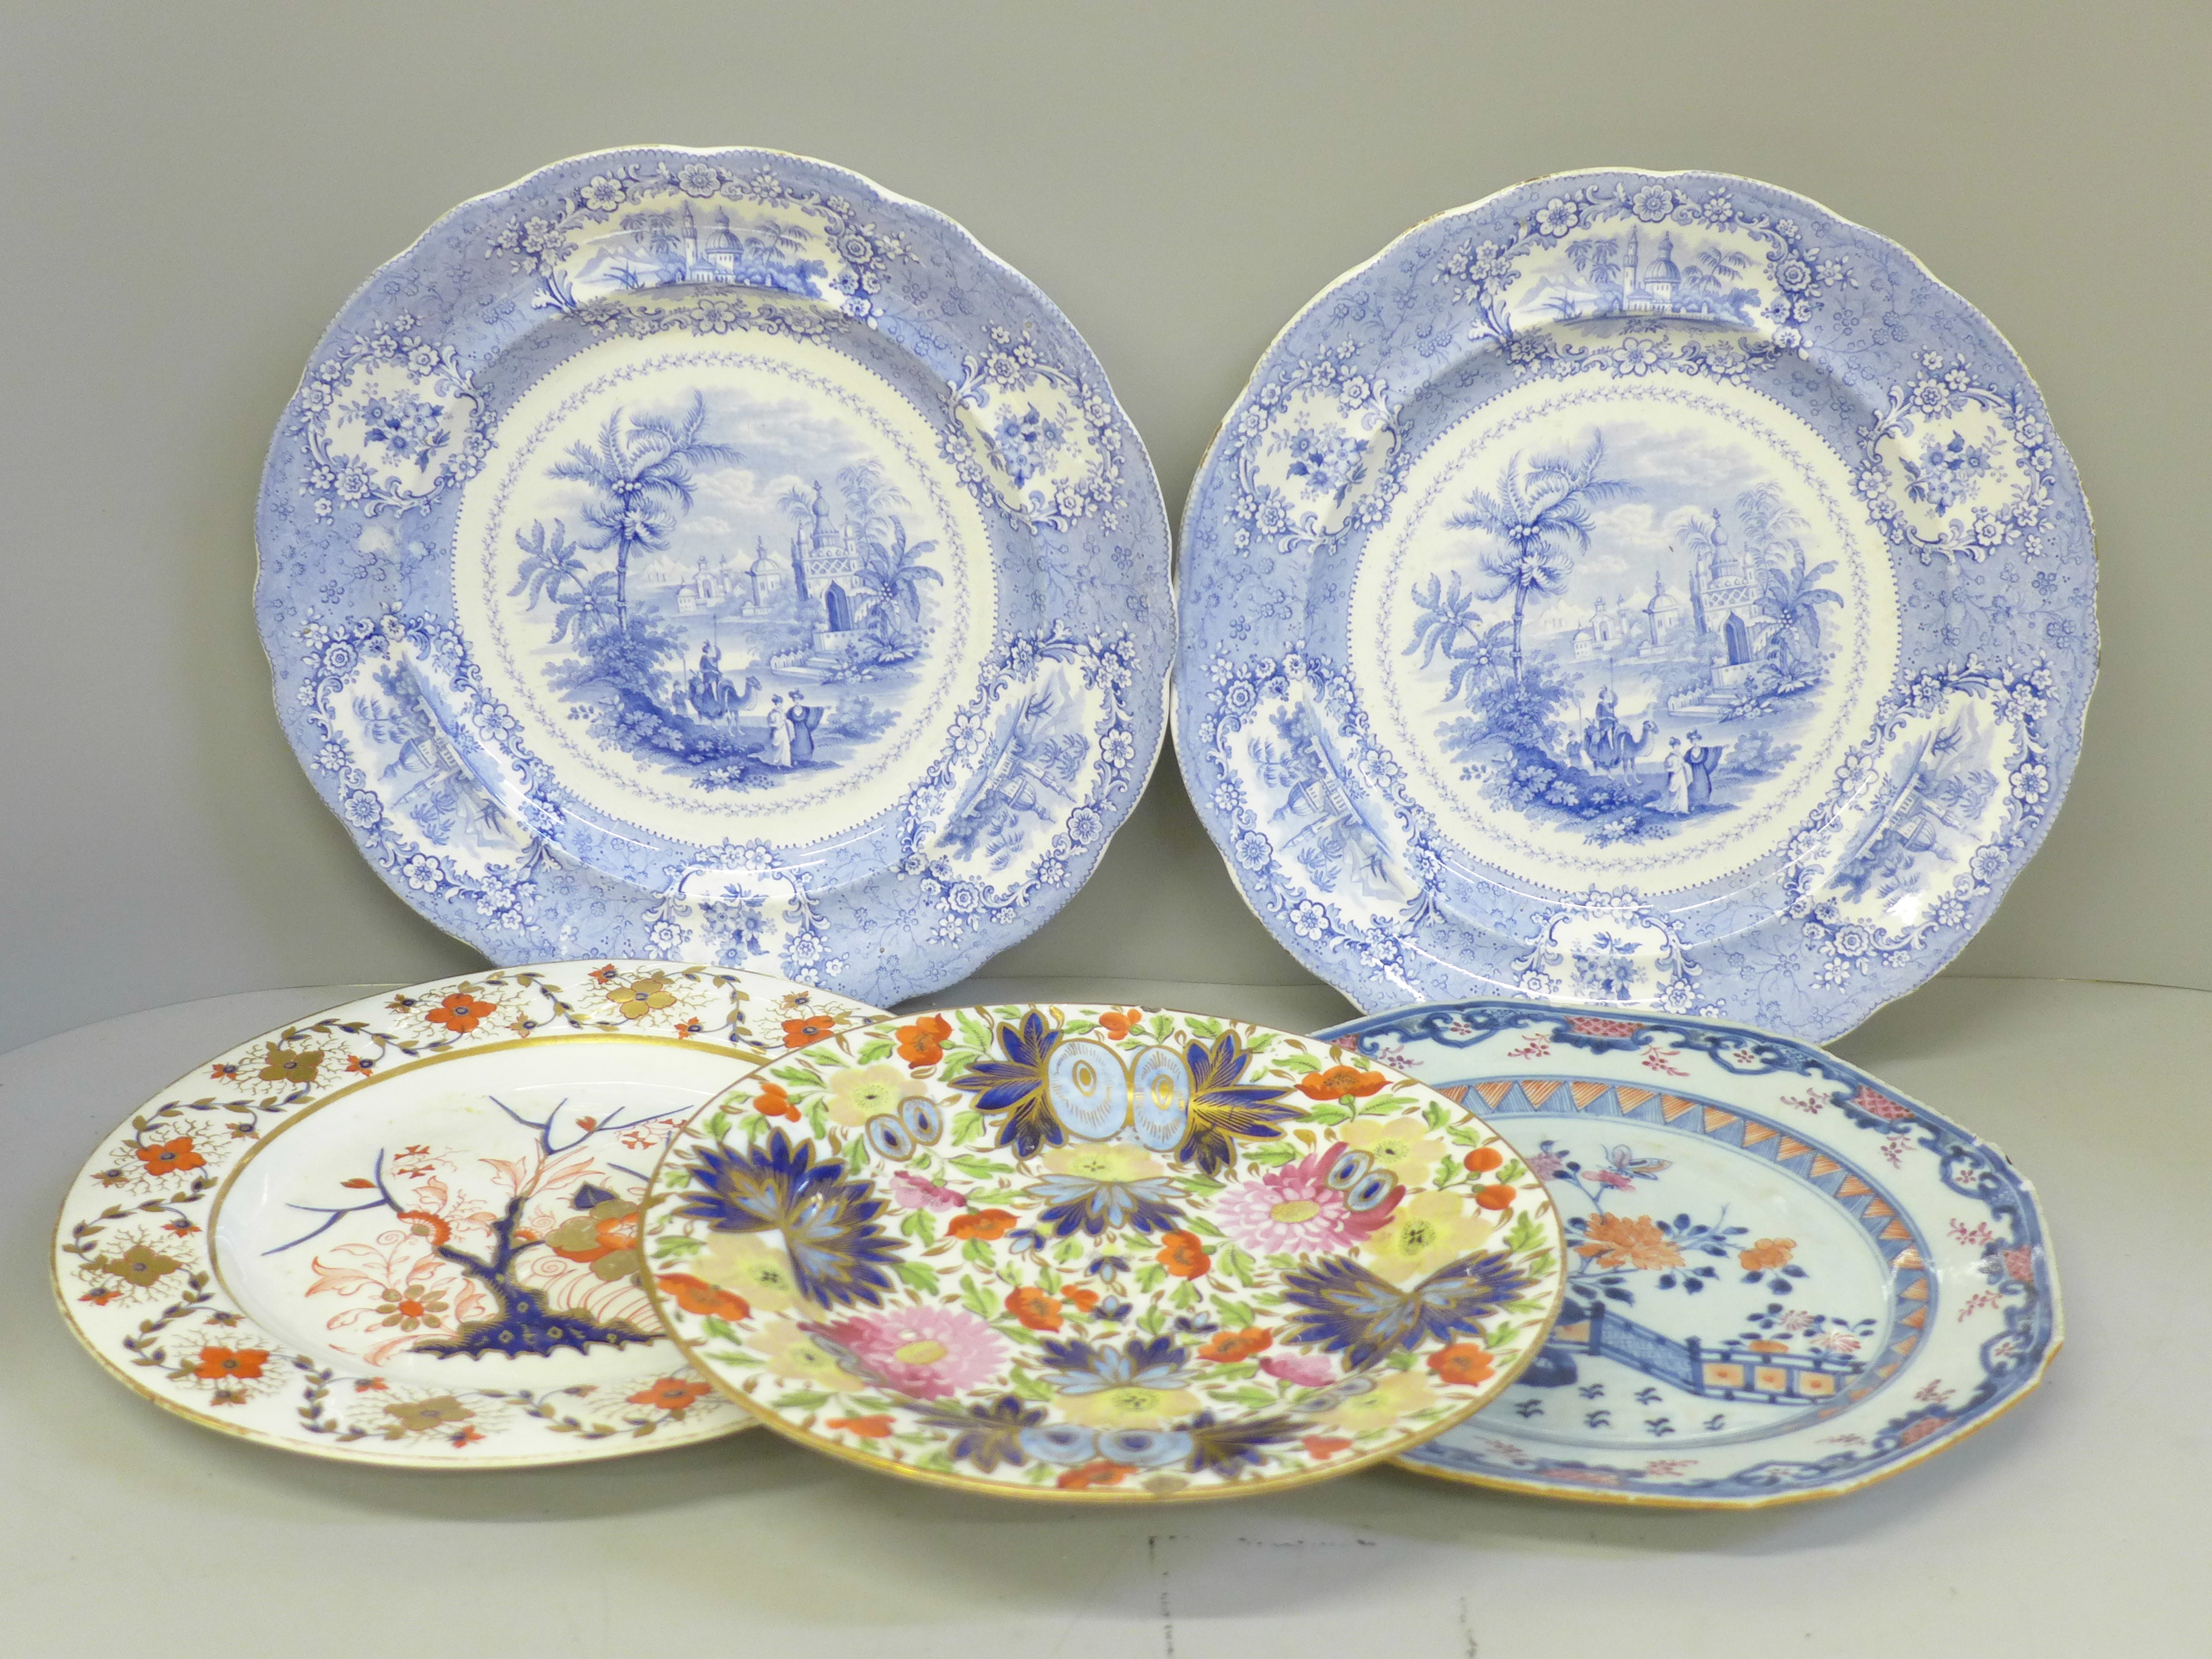 An 18th Century Chinese porcelain plate, Crown Derby plate and creamware plate and two 19th